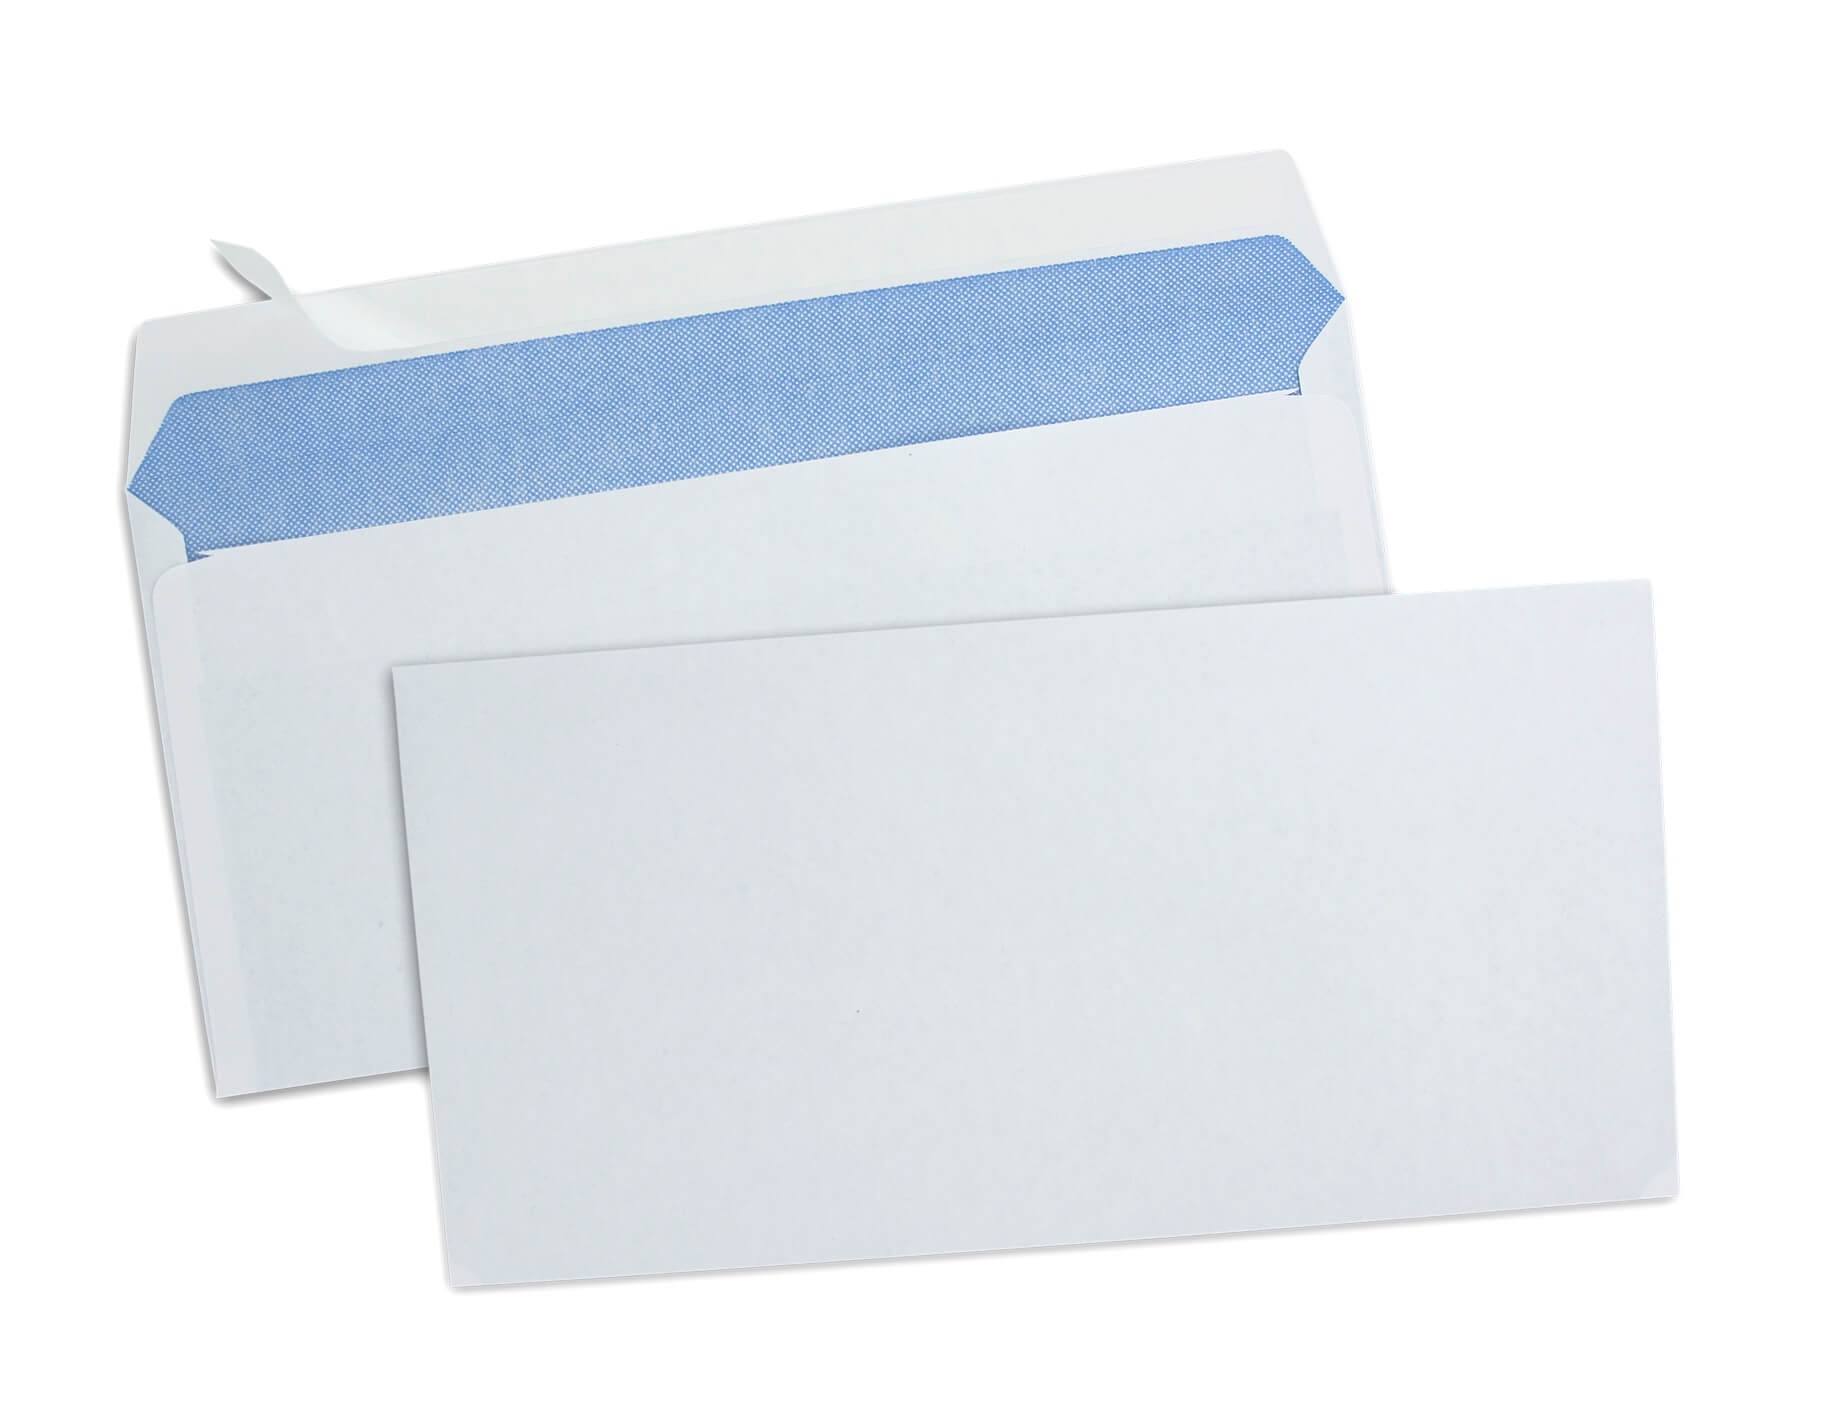 500 ENVELOPPES BLANCHES 80G 110X220 DL AUTO ADHESIVES